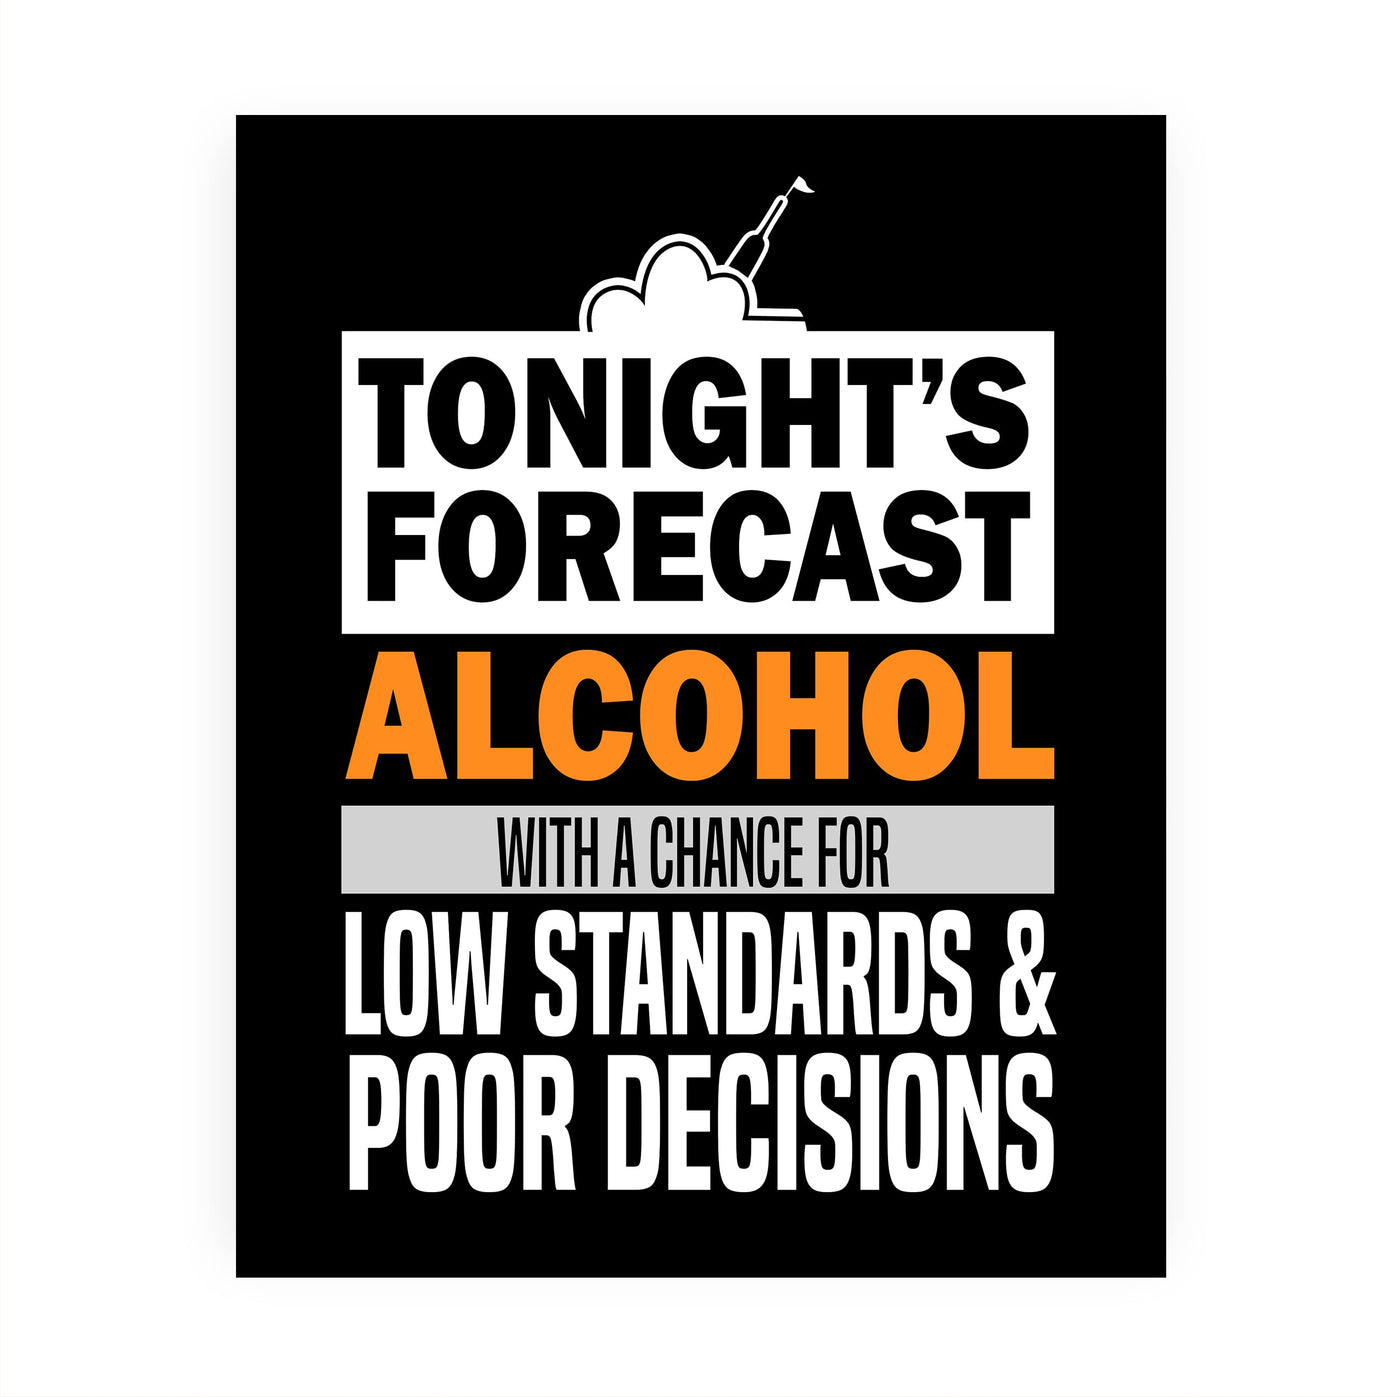 Tonight's Forecast-Alcohol With a Chance of Poor Decisions -Funny Beer & Drinking Sign Wall Art -8 x 10" Photo Print-Ready to Frame. Humorous Home-Kitchen-Bar-Man Cave Decor. Fun Gift for Drinkers!